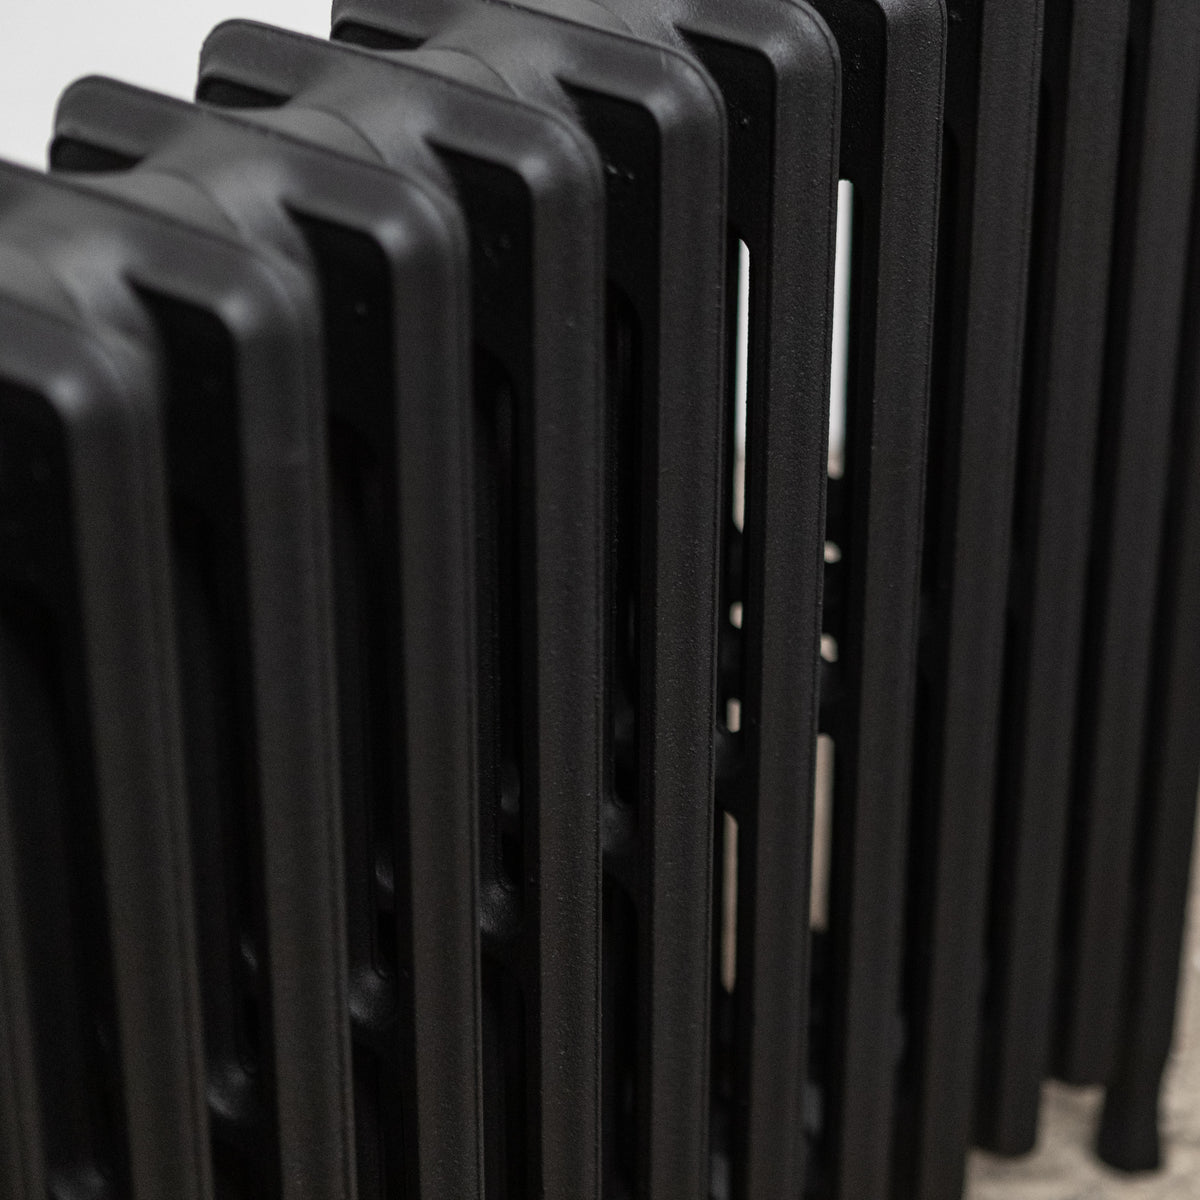 Fully Restored Cast Iron Radiator (61.5cm Tall x 107cm Long) | 2 Available | The Architectural Forum